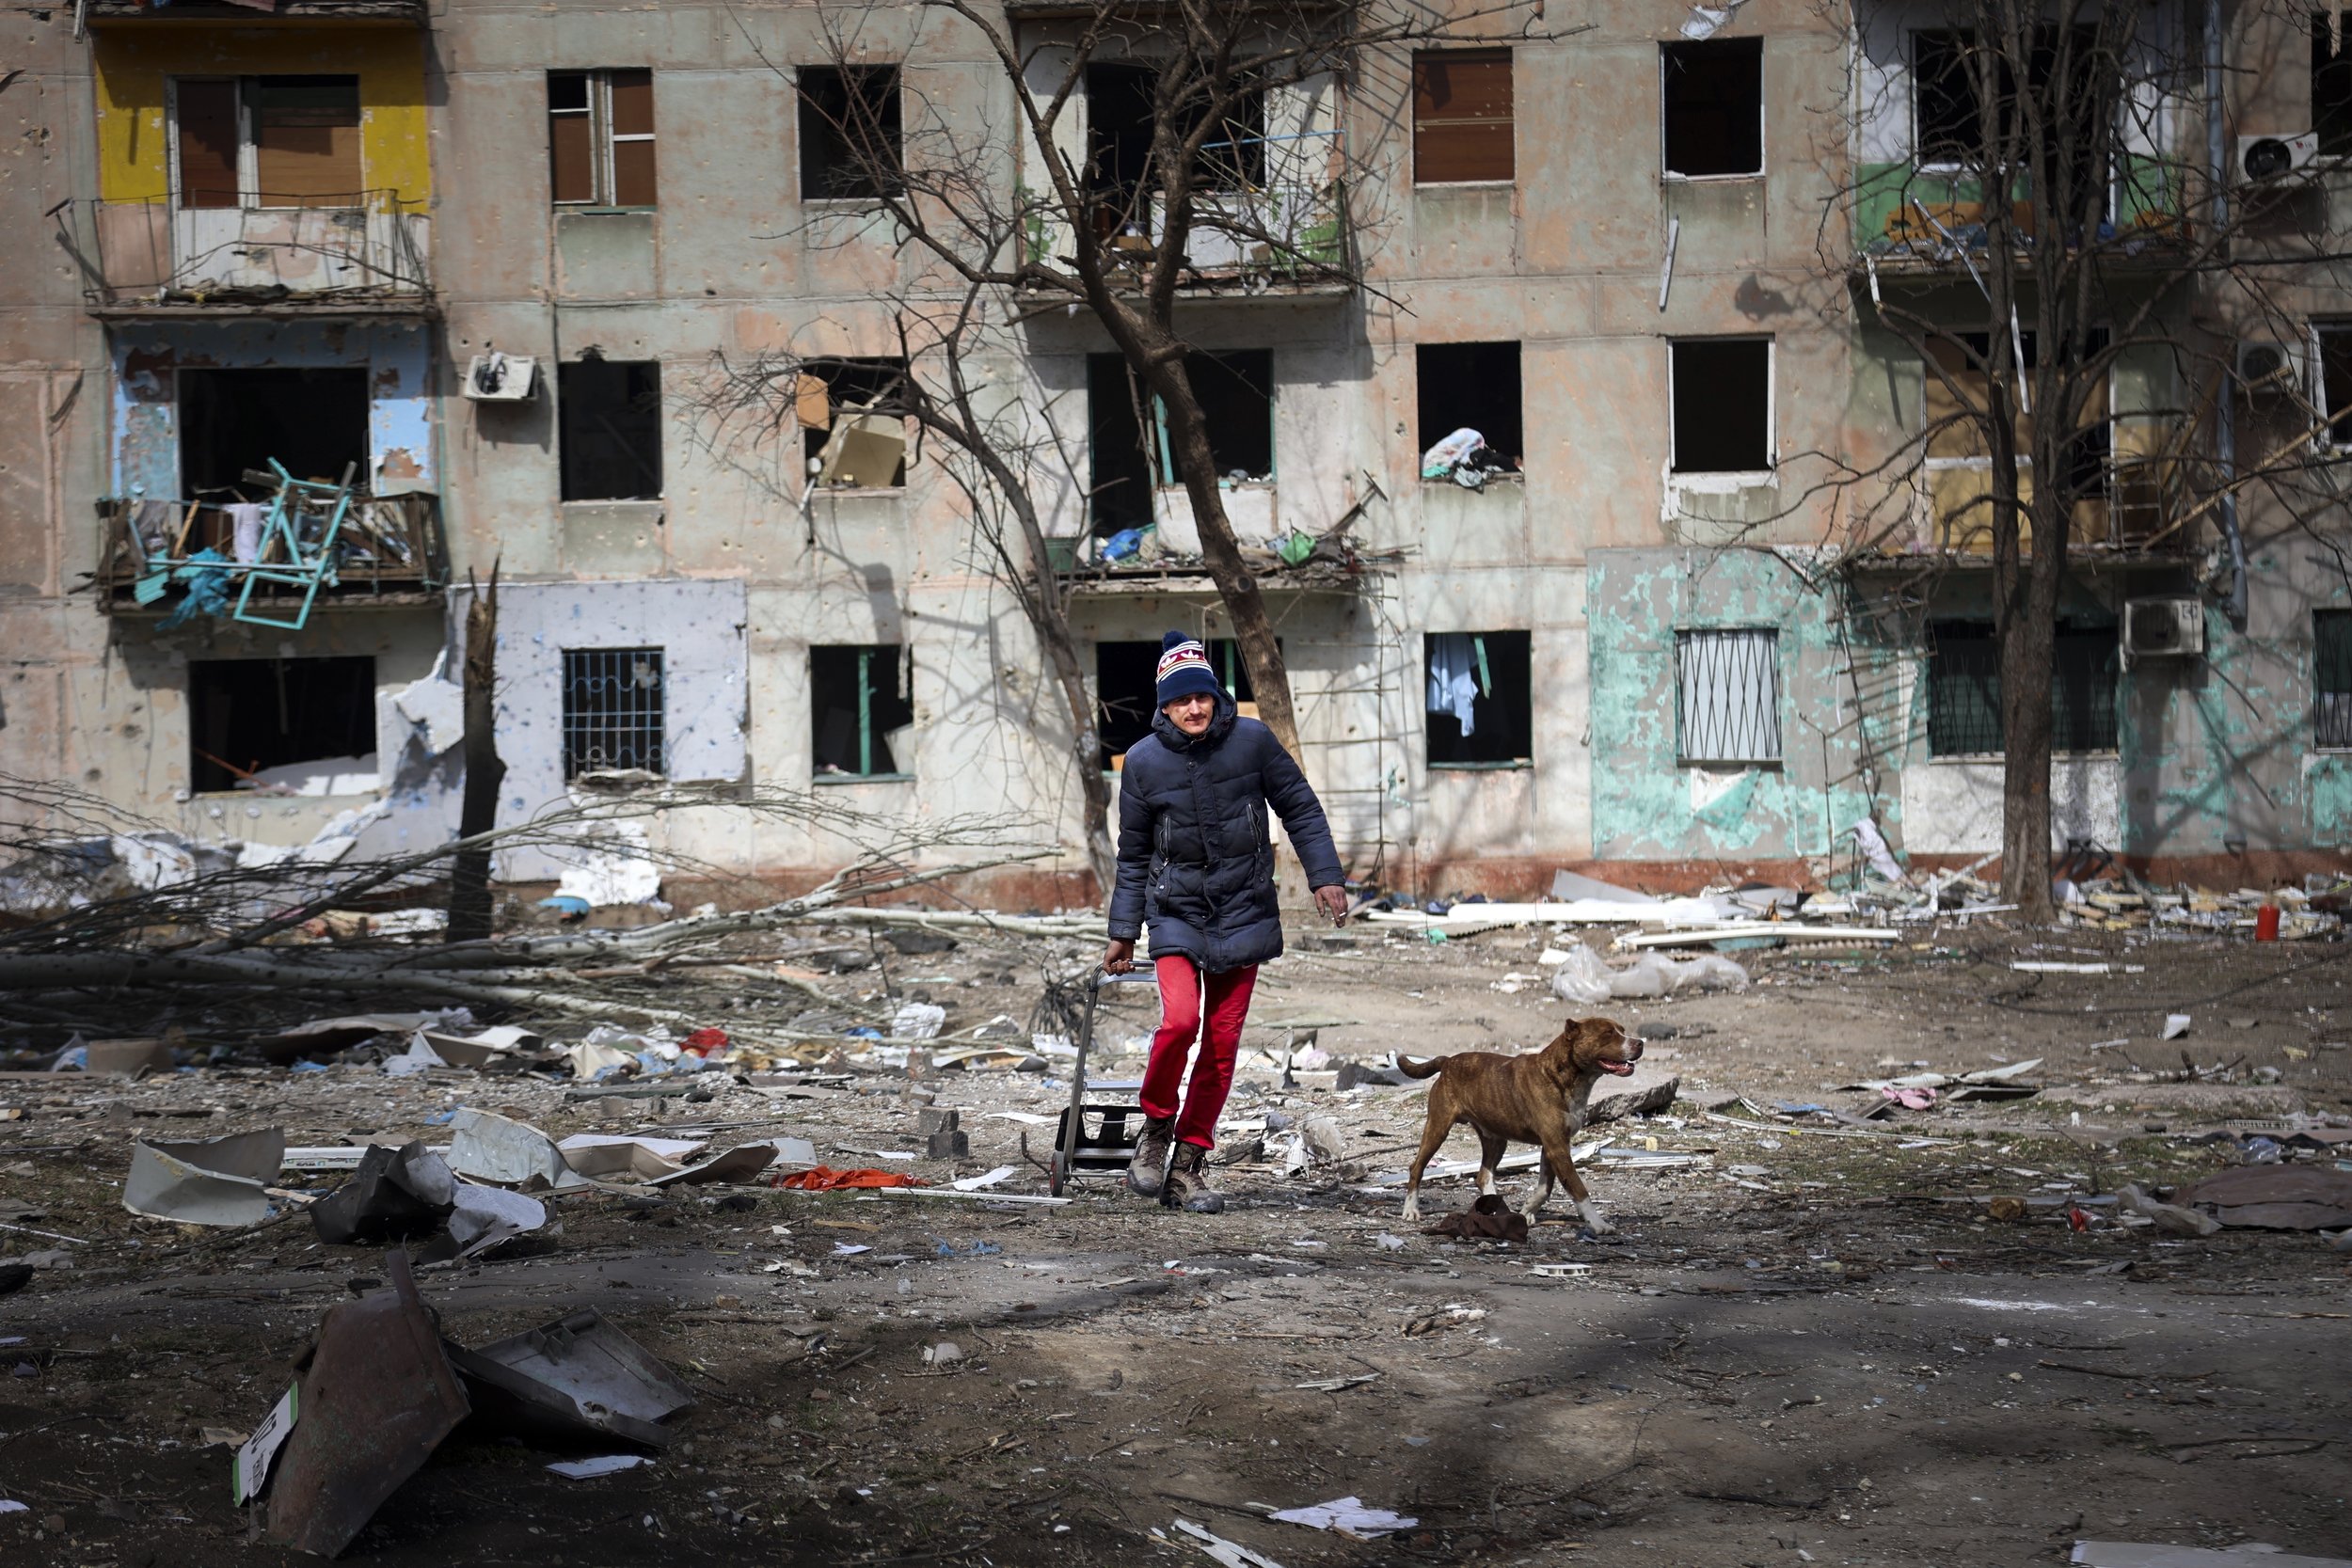  A man walks with his dog near an apartment building damaged by shelling from fighting on the outskirts of Mariupol, Ukraine, in territory under control of the separatist government of the Donetsk People's Republic, on Tuesday, March 29, 2022. (AP Ph